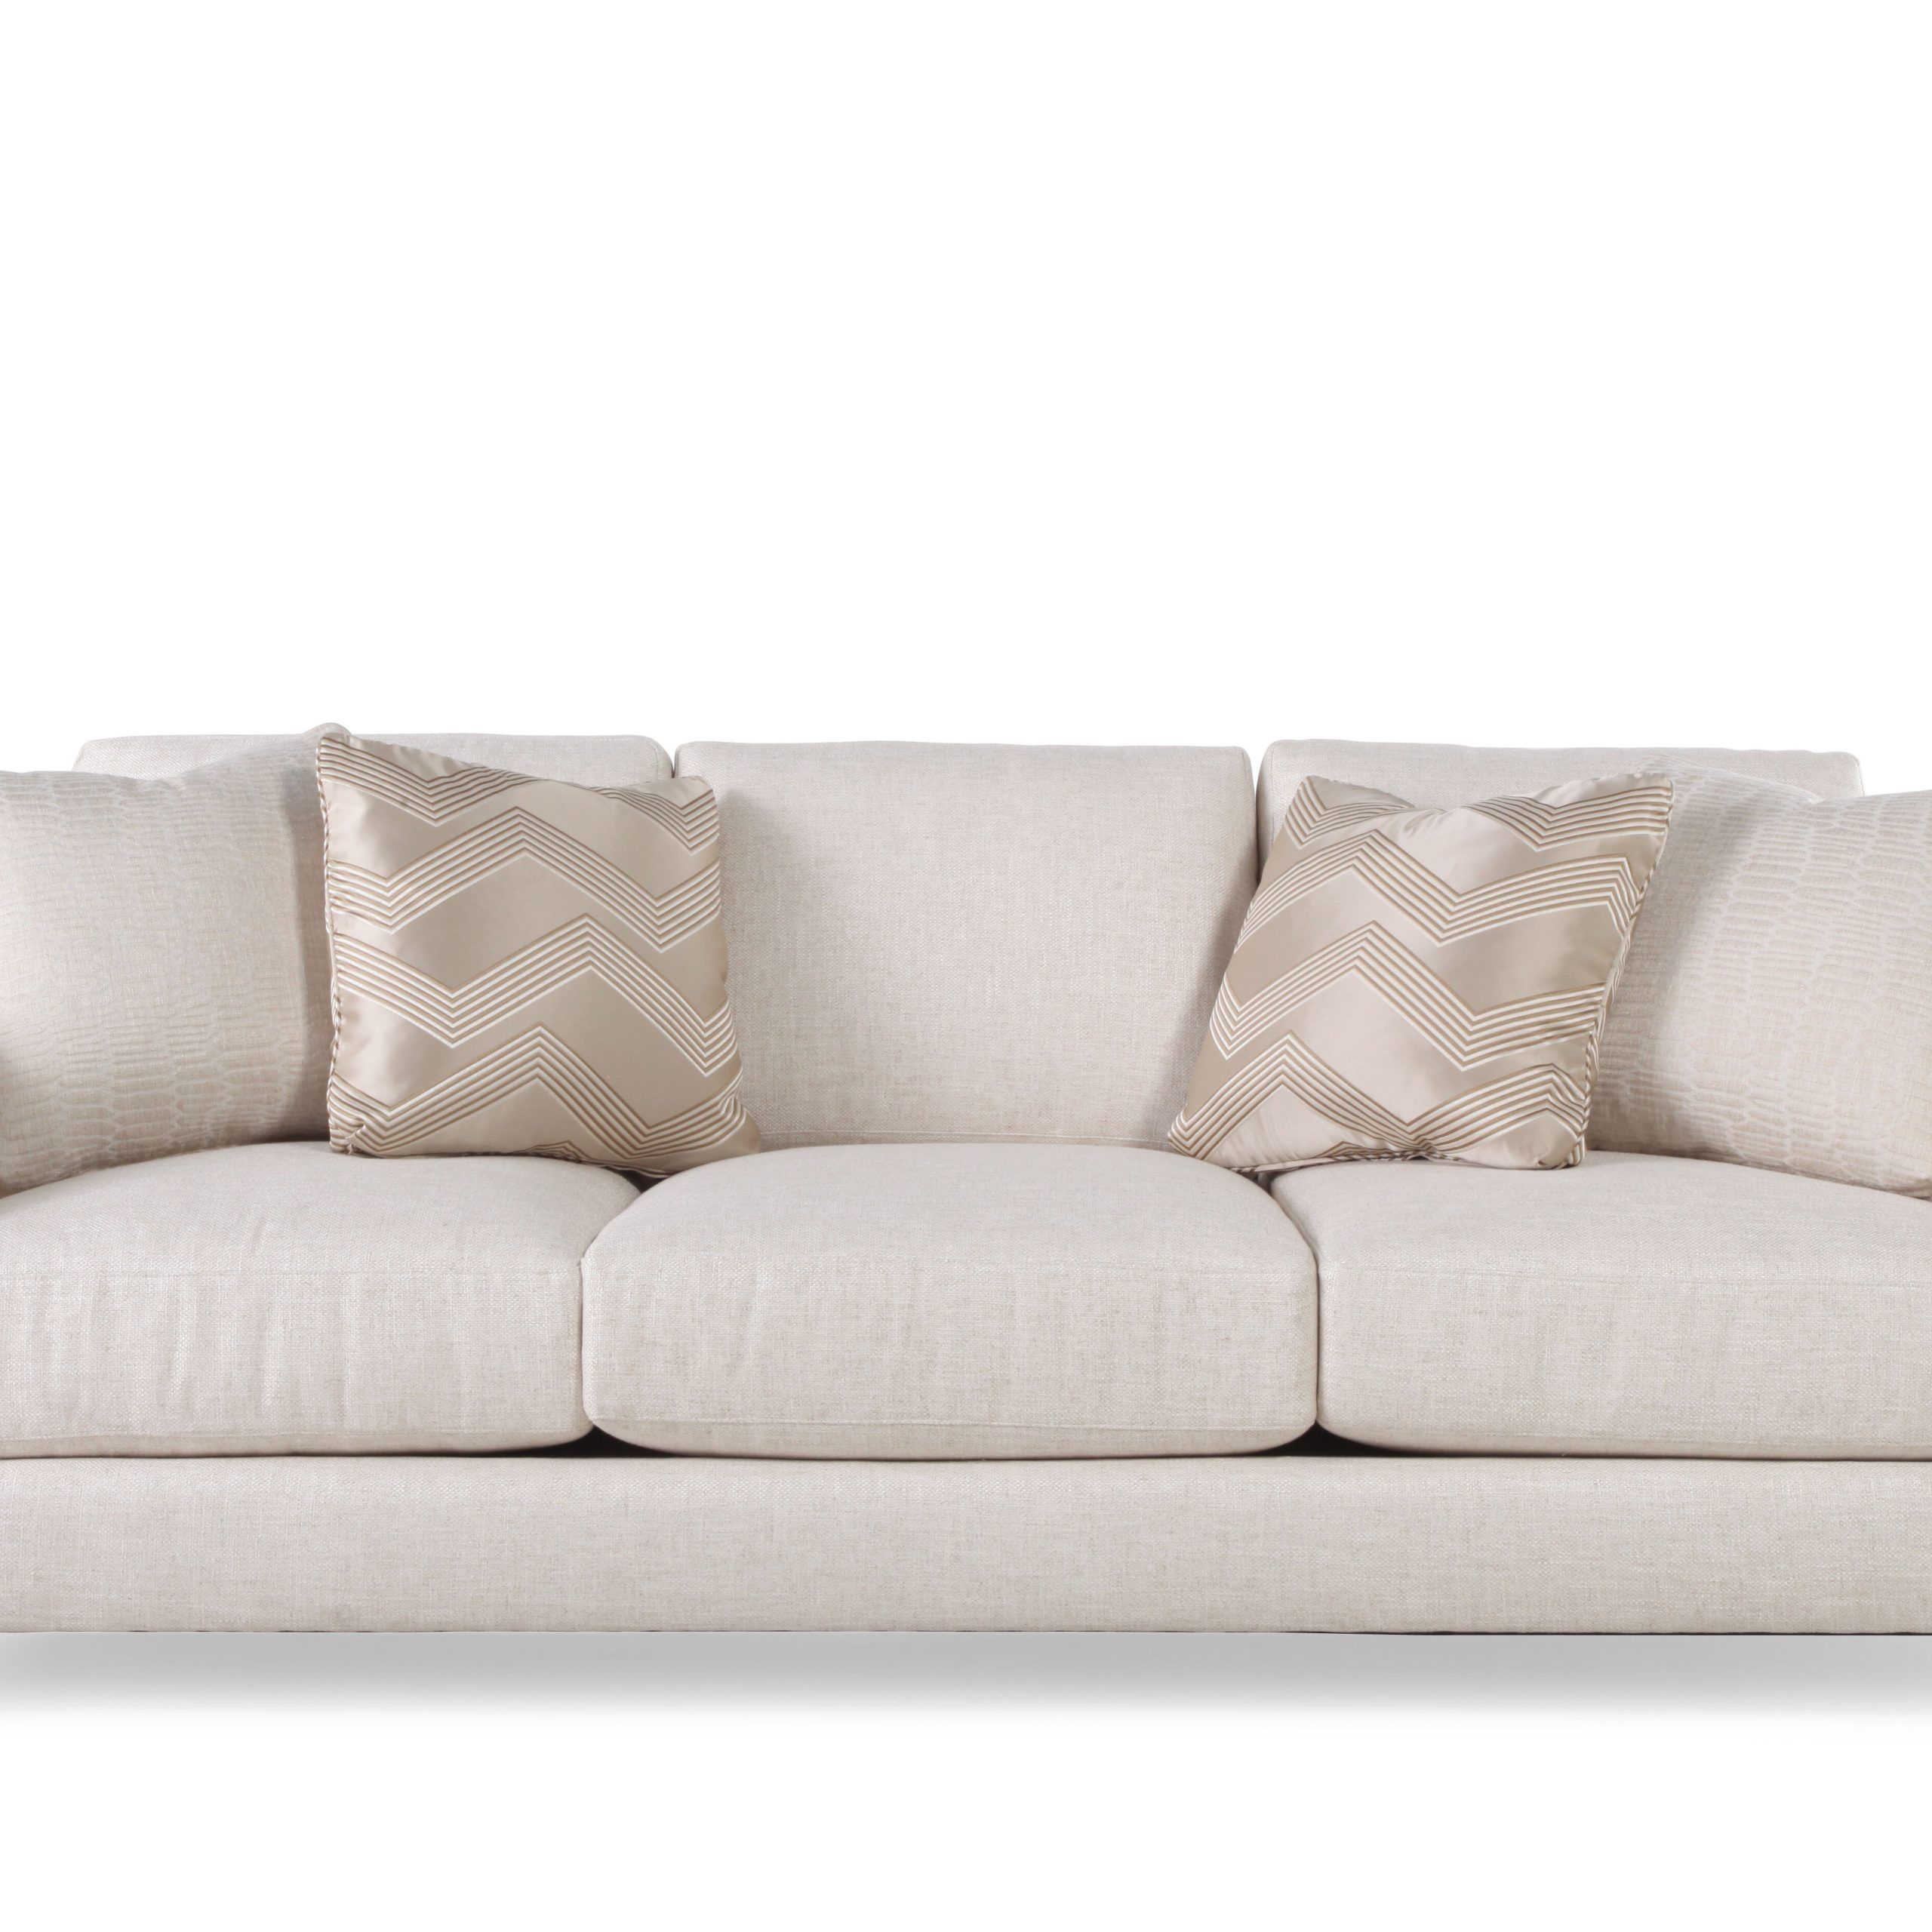 Modern 93.5" Sofa In Cream | Mathis Brothers Furniture In Sofas In Cream (Gallery 1 of 20)